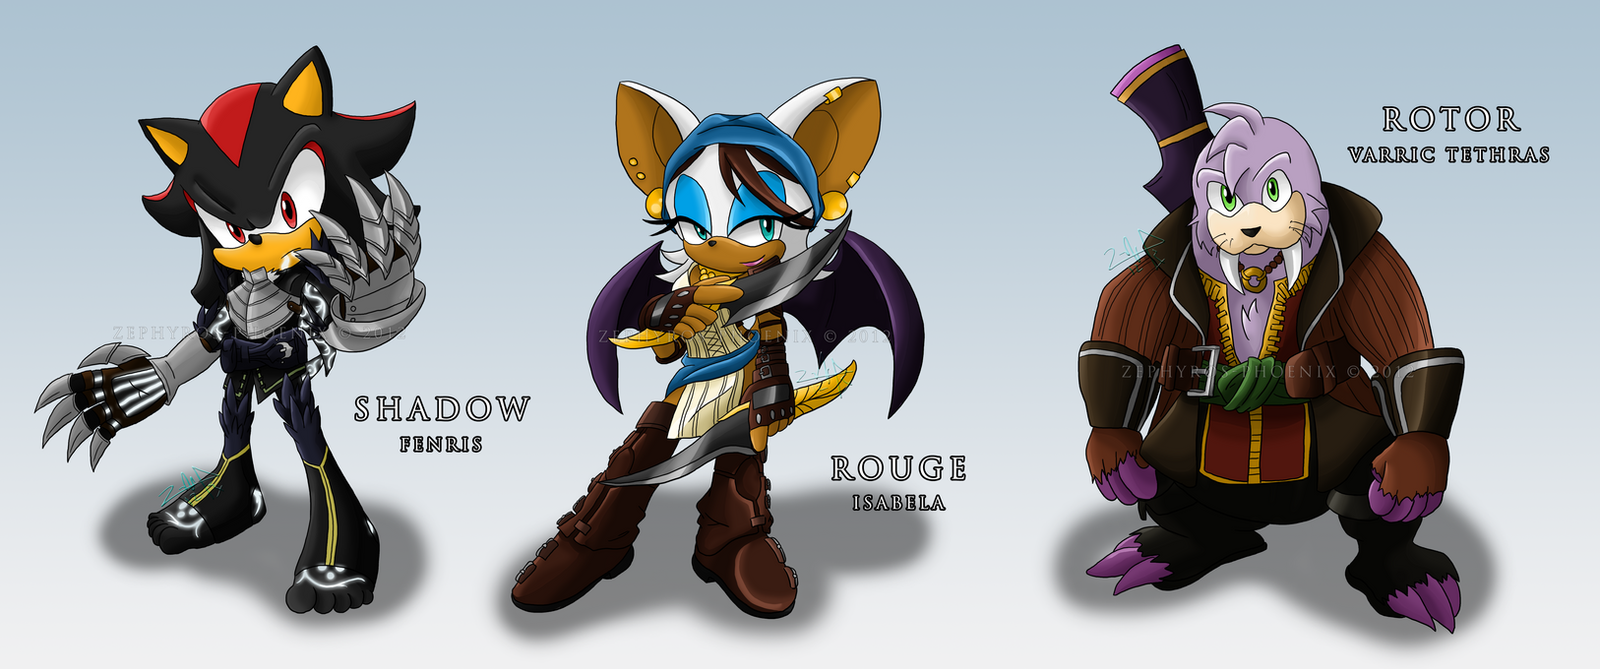 sonic_age__shadow__rouge_and_rotor_by_zephyros_phoenix-d5jd62j.png